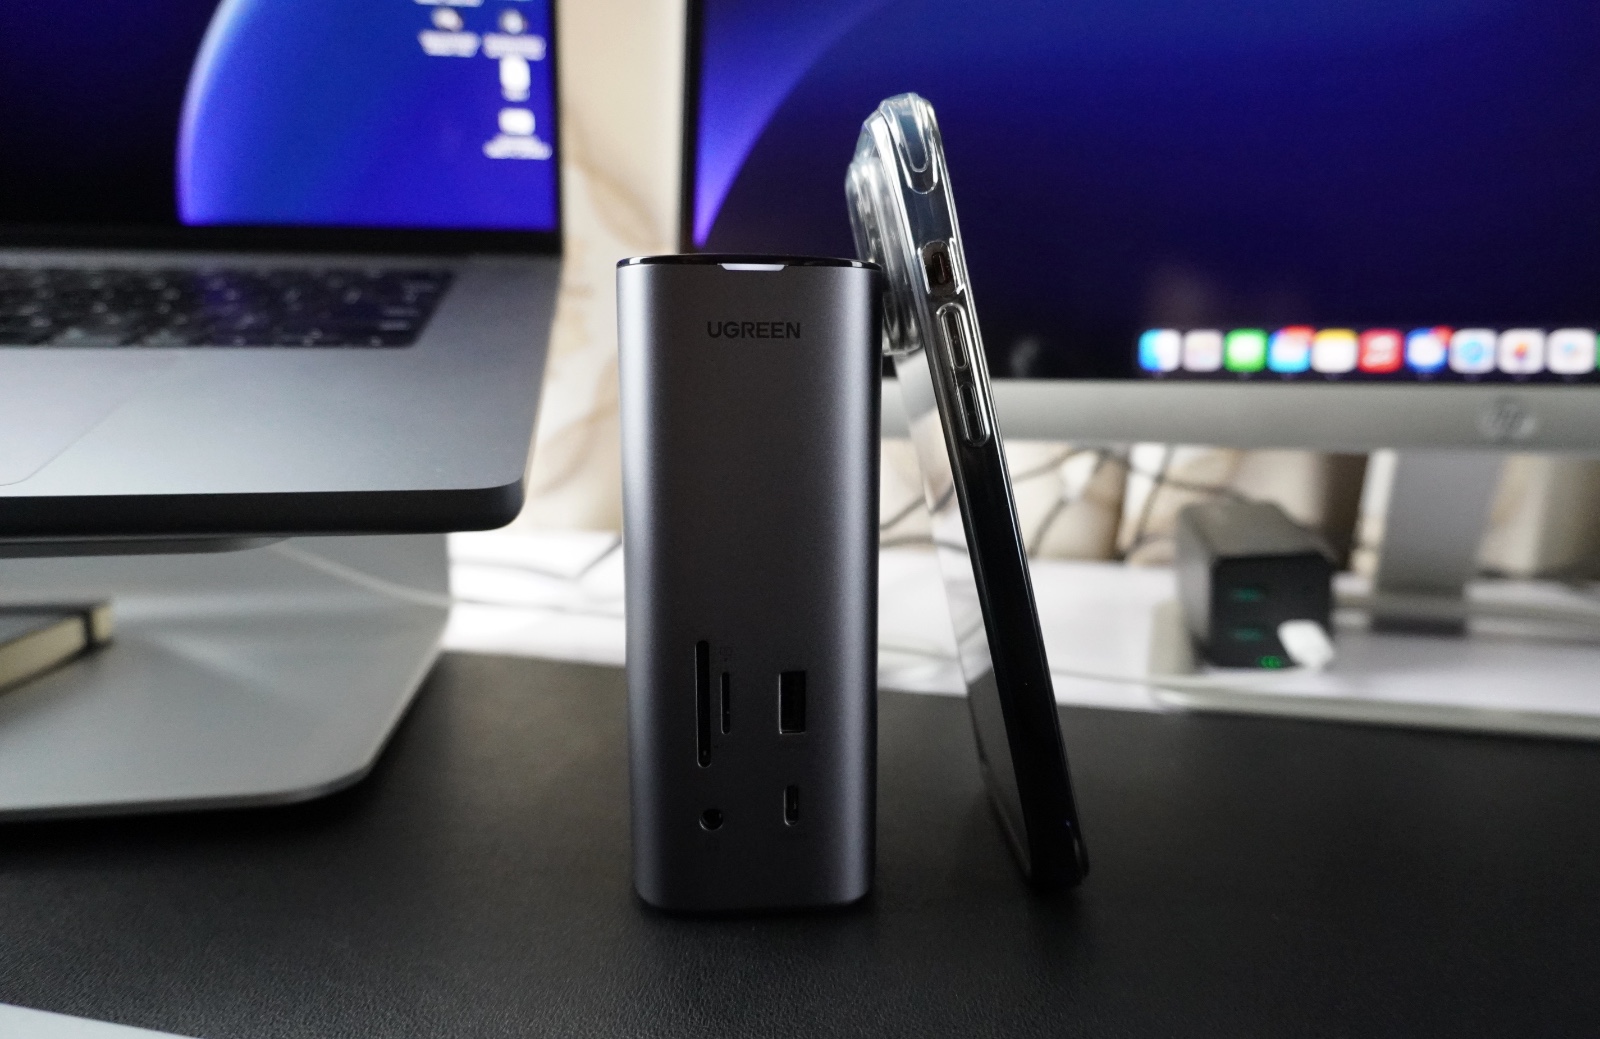 Ugreen USB C Triple Display Docking Station (12-in-1) Review - iOS Hacker